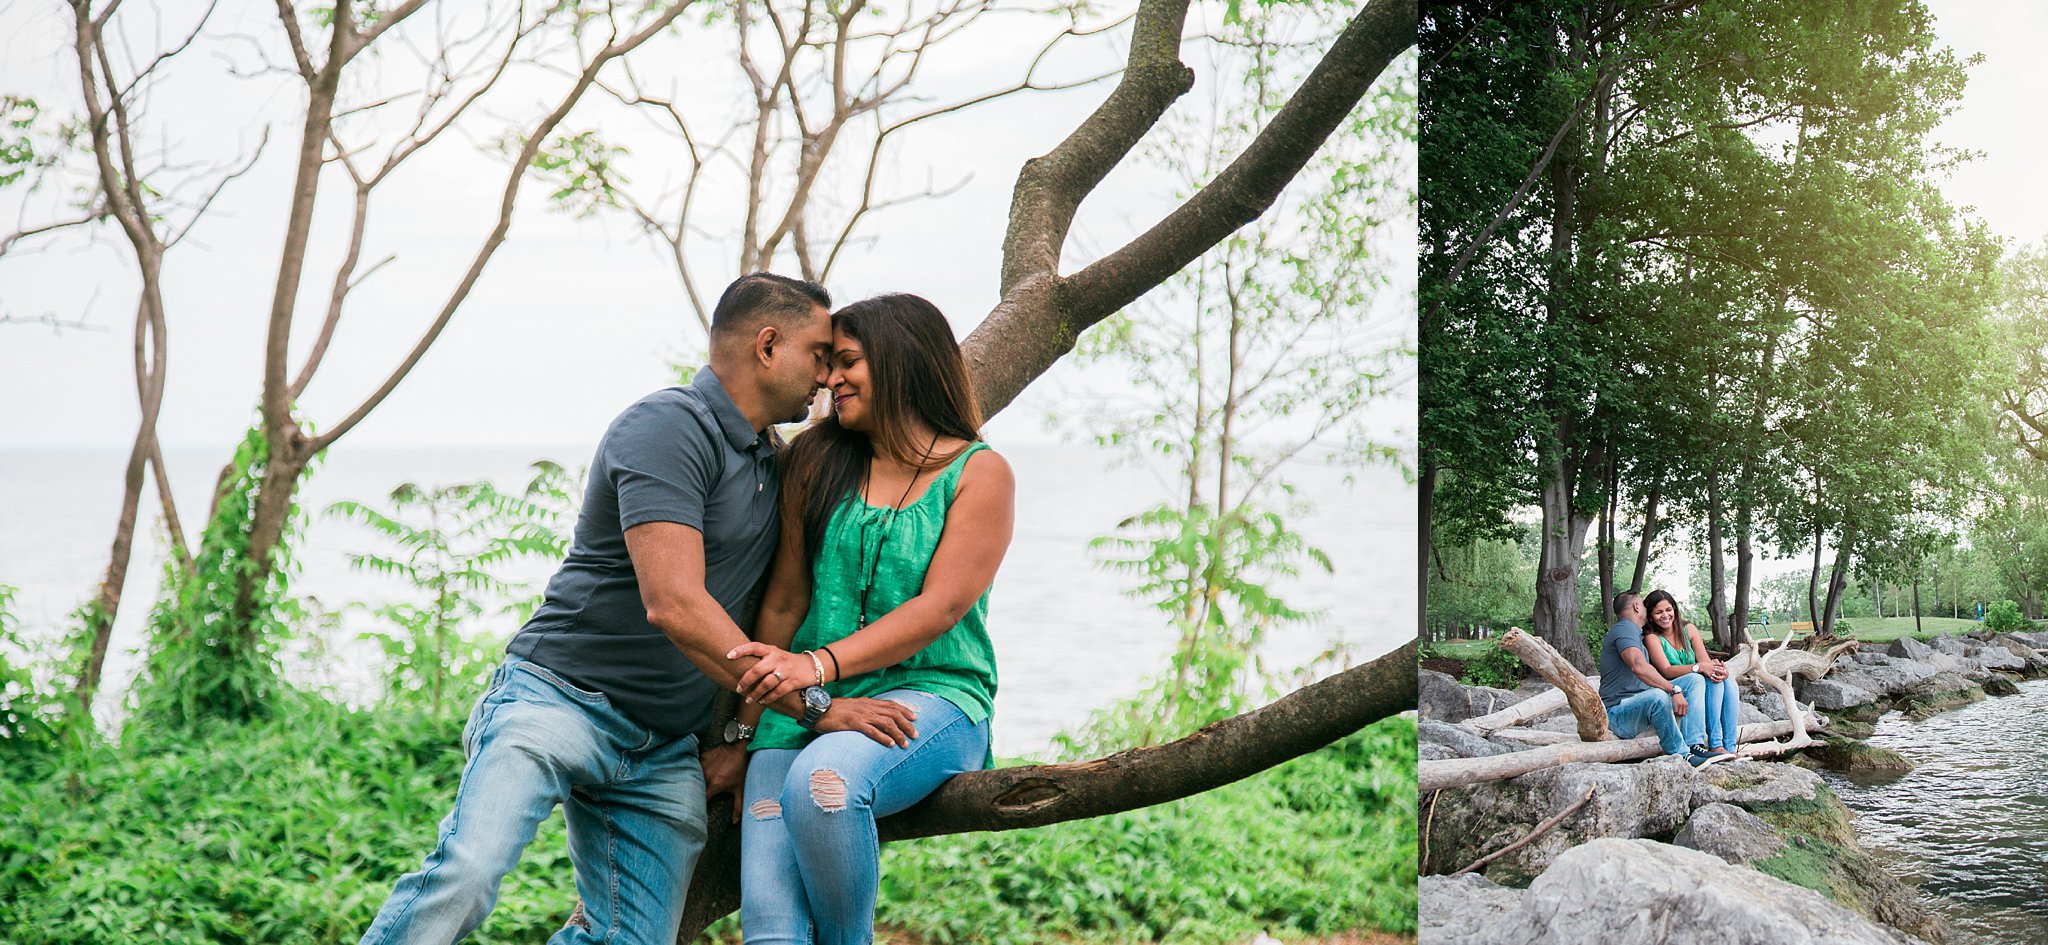 Jennifer Blaak Photography, Toronto Wedding Photographer, Engagement Session at Jack Darling Memorial Park in Mississauga, Couple in tree, Couple sitting on rocks